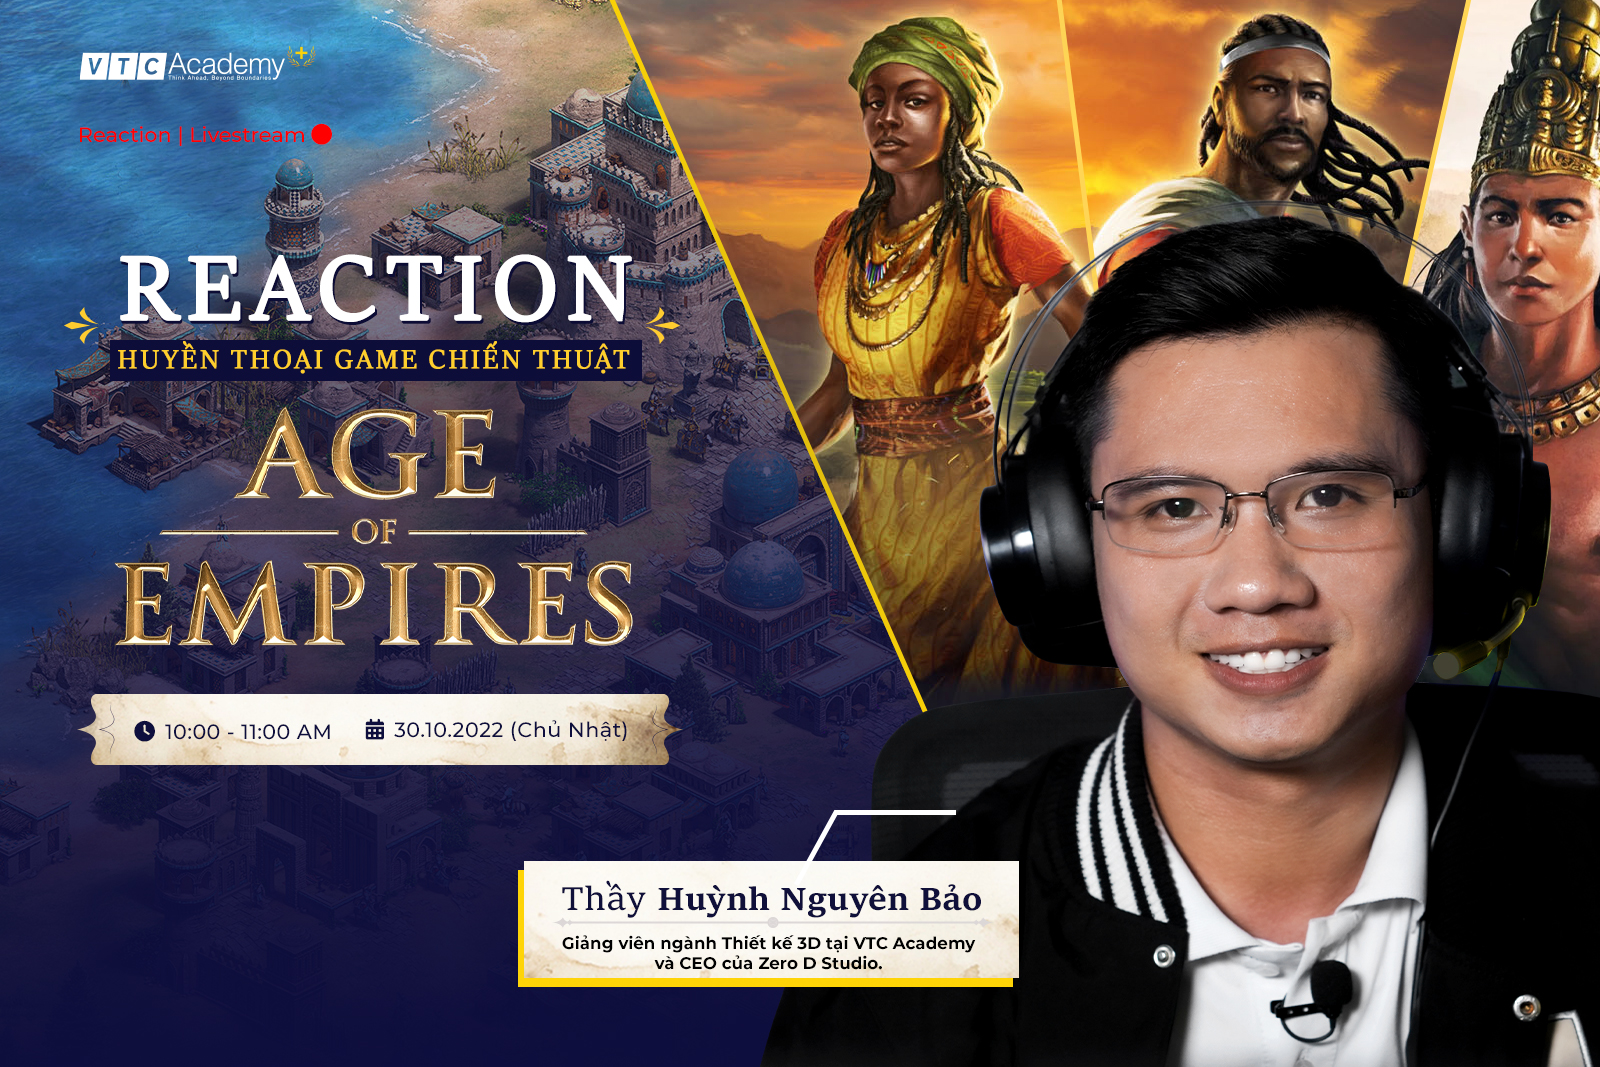 Age Of Empires: Reaction huyền thoại game chiến thuật